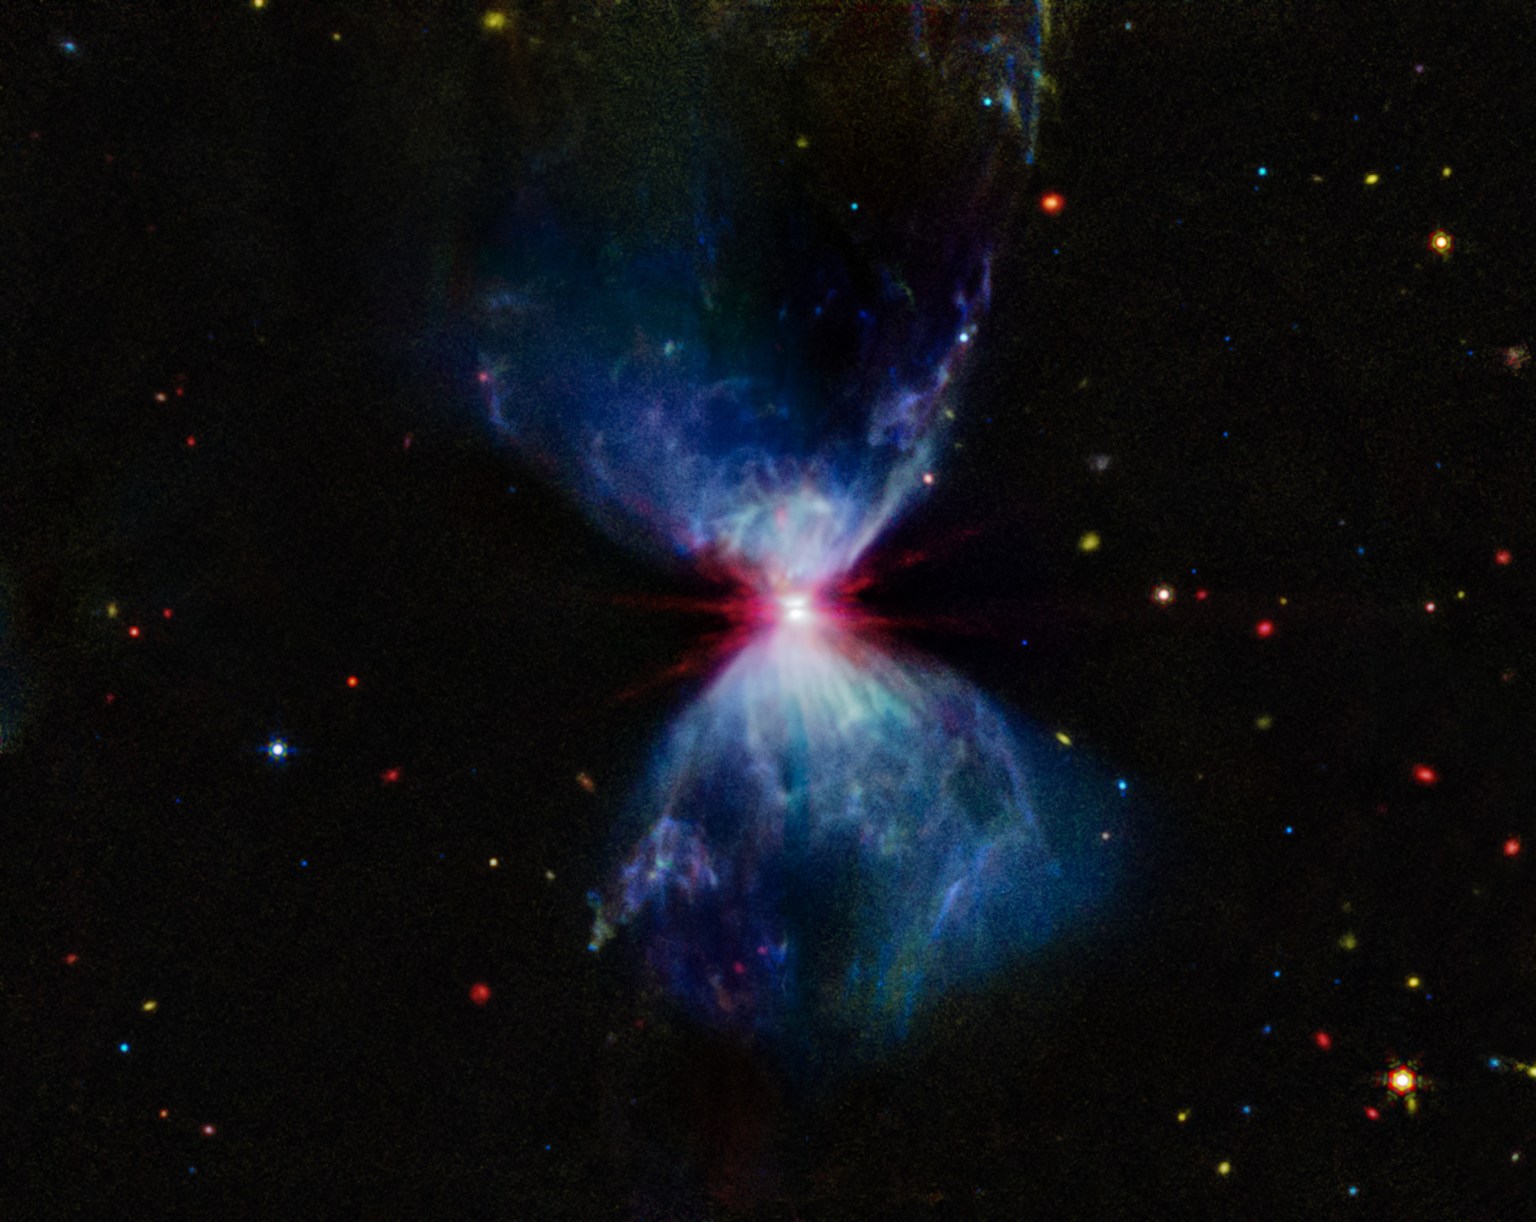 A growing protostar embedded within a molecular cloud. The center of the image shows a bright, red region, where the growing protostar resides, with a thin, gray lane of matter cutting through it horizontally, which is the protostar's accretion disk. Above and below this region are blue triangular-shaped molecular clouds, which give the overall object an hourglass shape. The areas in the molecular clouds closest to the protostar have more pronounced plumes of blue gas. There are red, yellow, orange, blue, and green stars and galaxies scattered across the background.